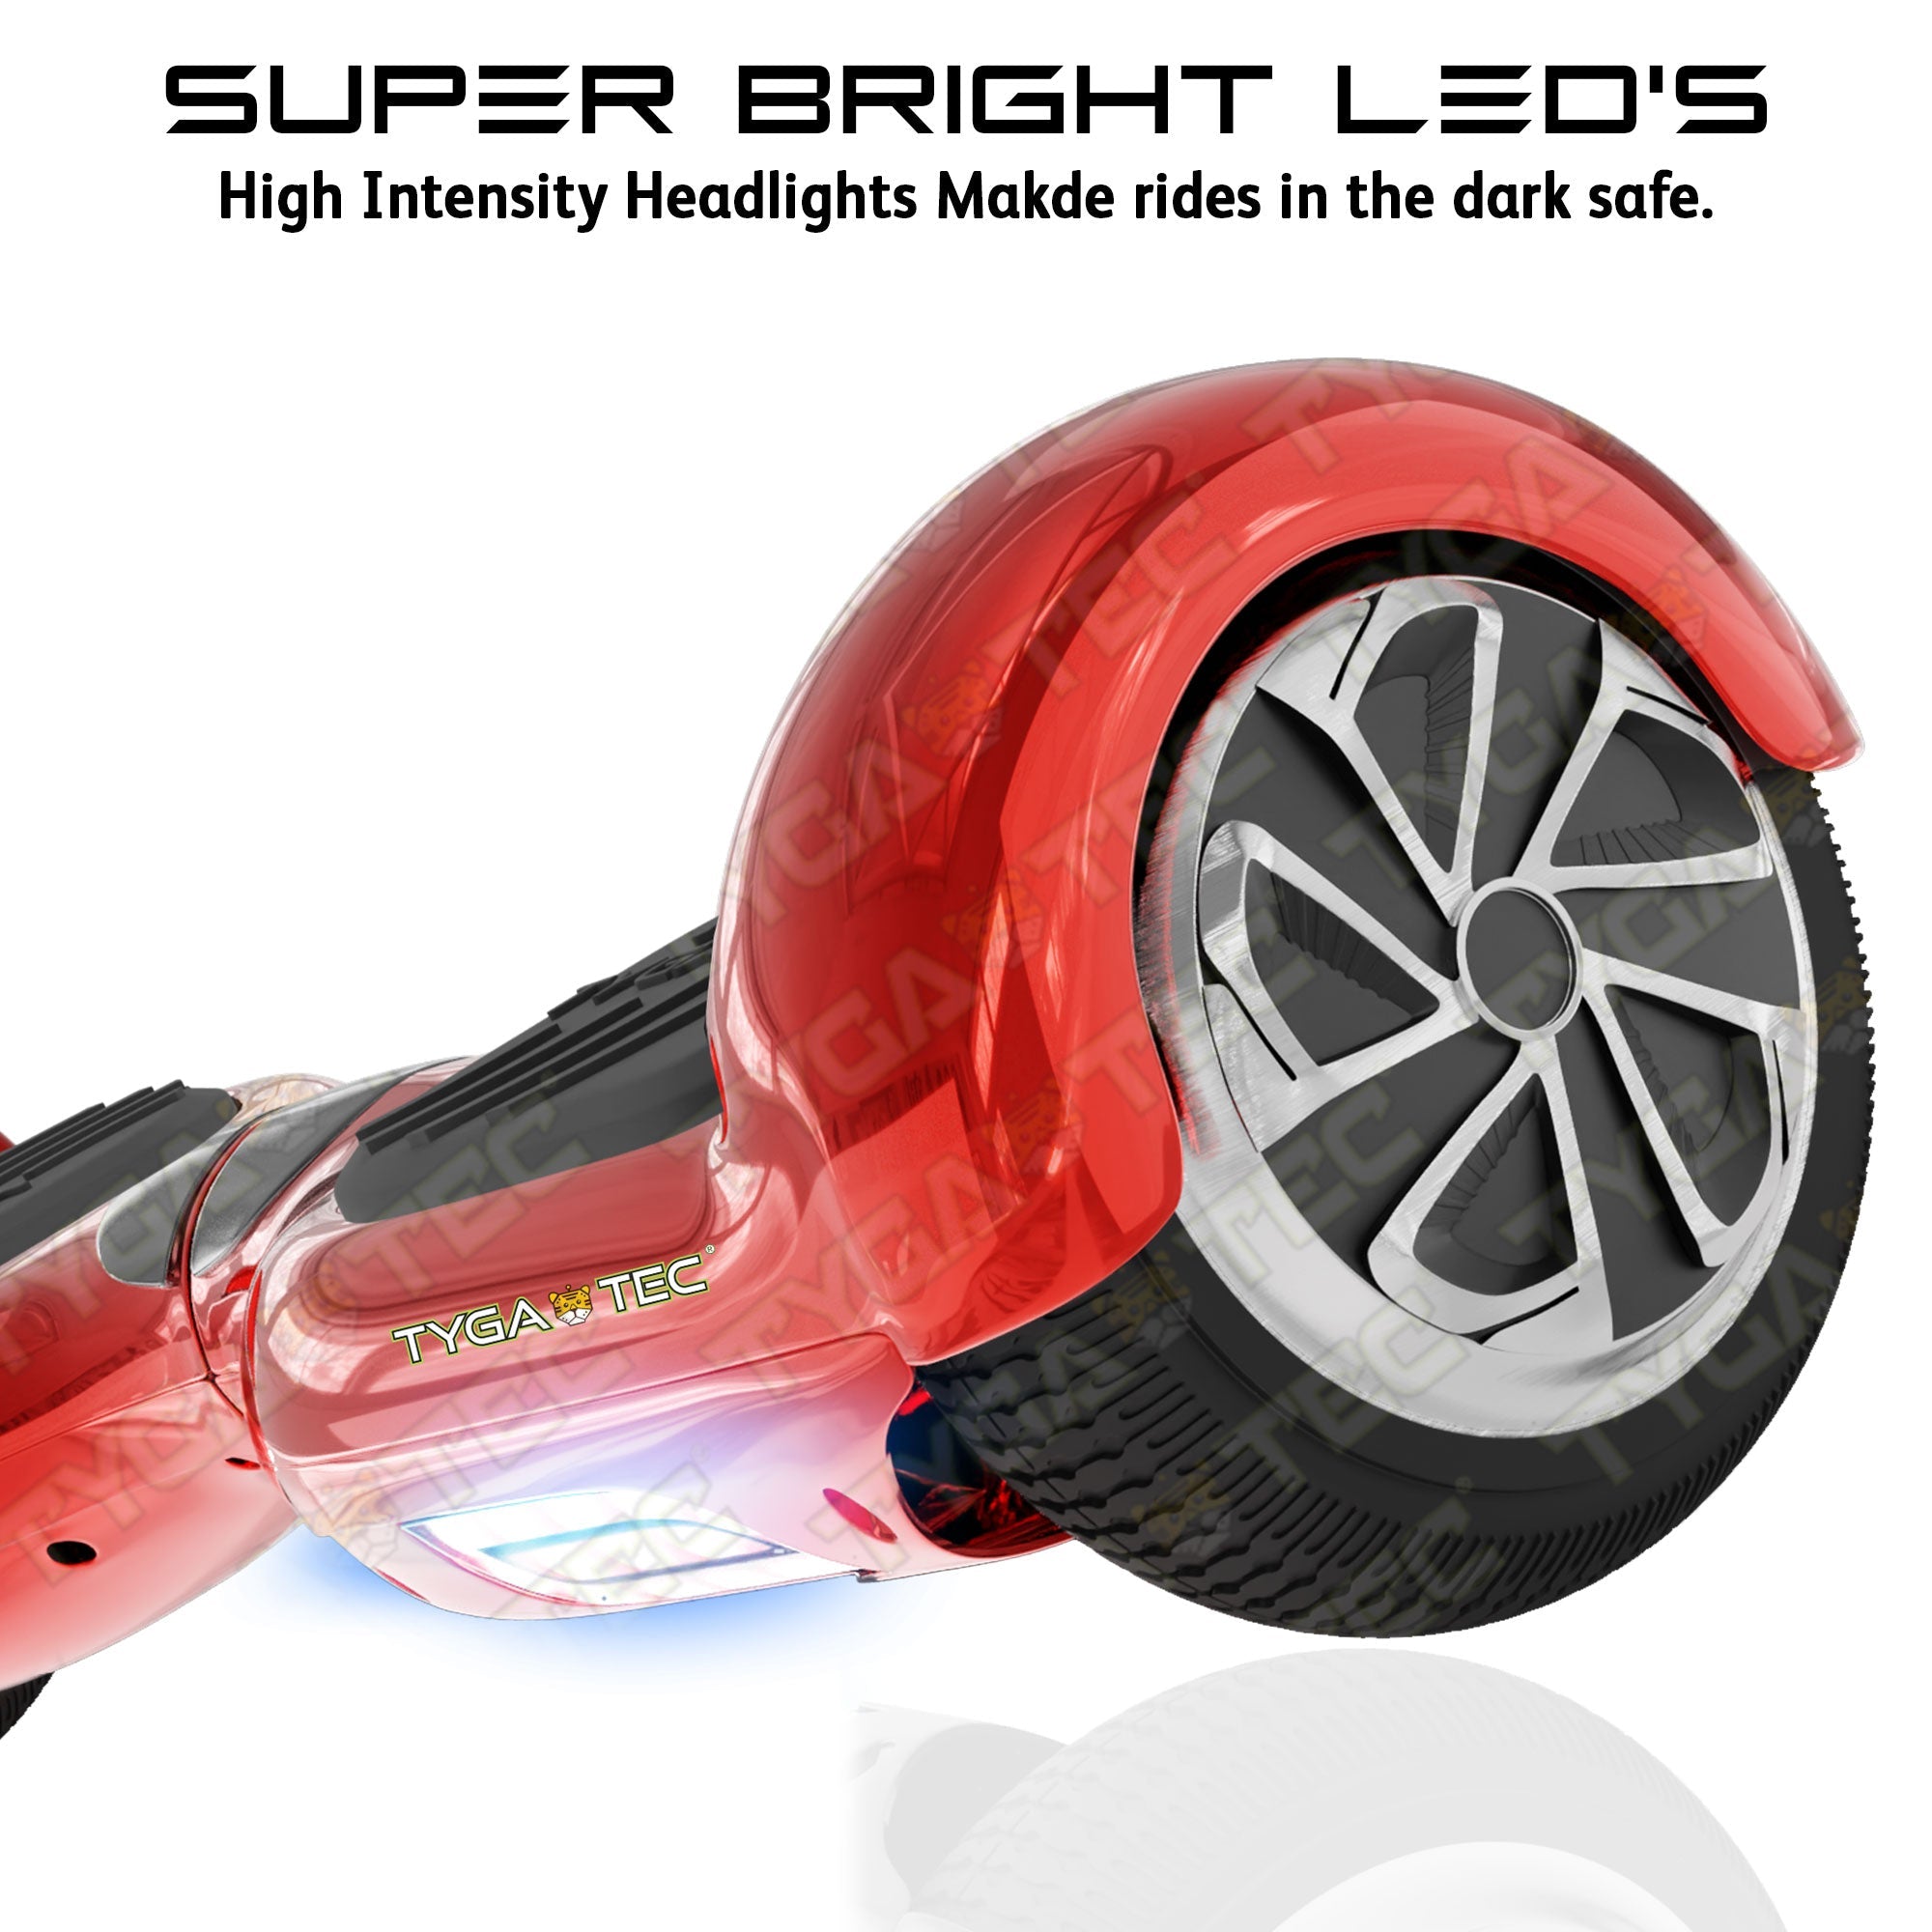 TYGATEC T2 Auto Balancing Hoverboard - Red